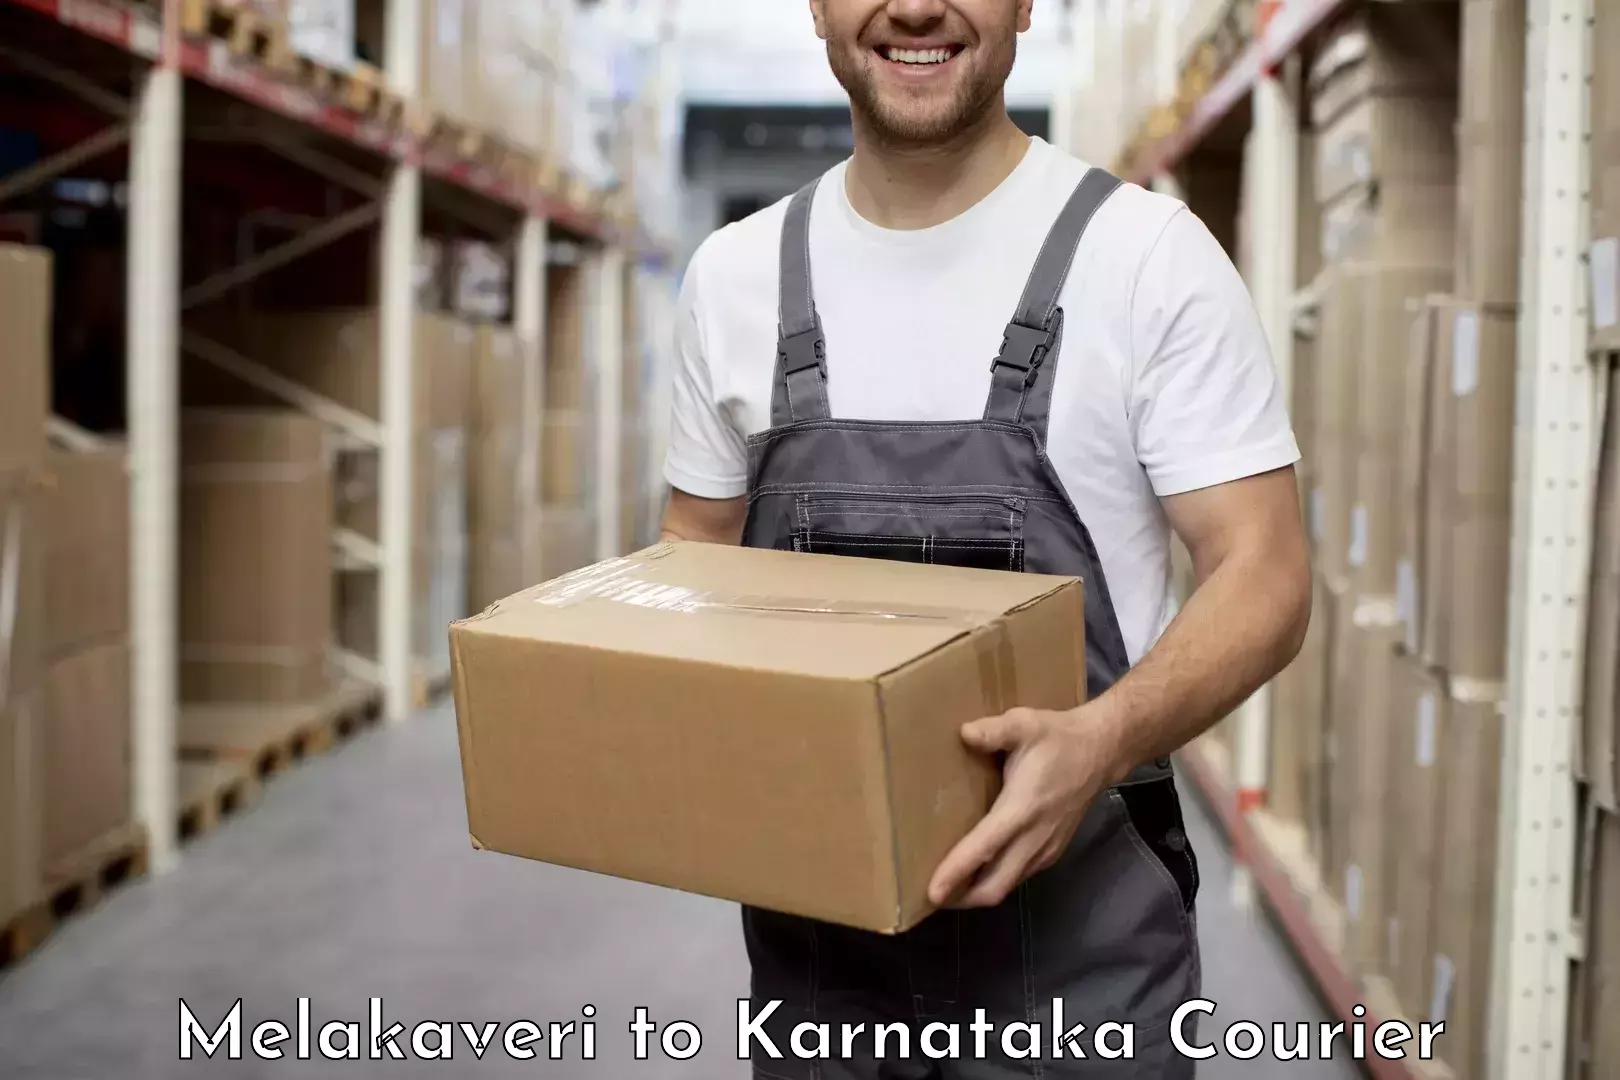 Overnight delivery services Melakaveri to Chikmagalur